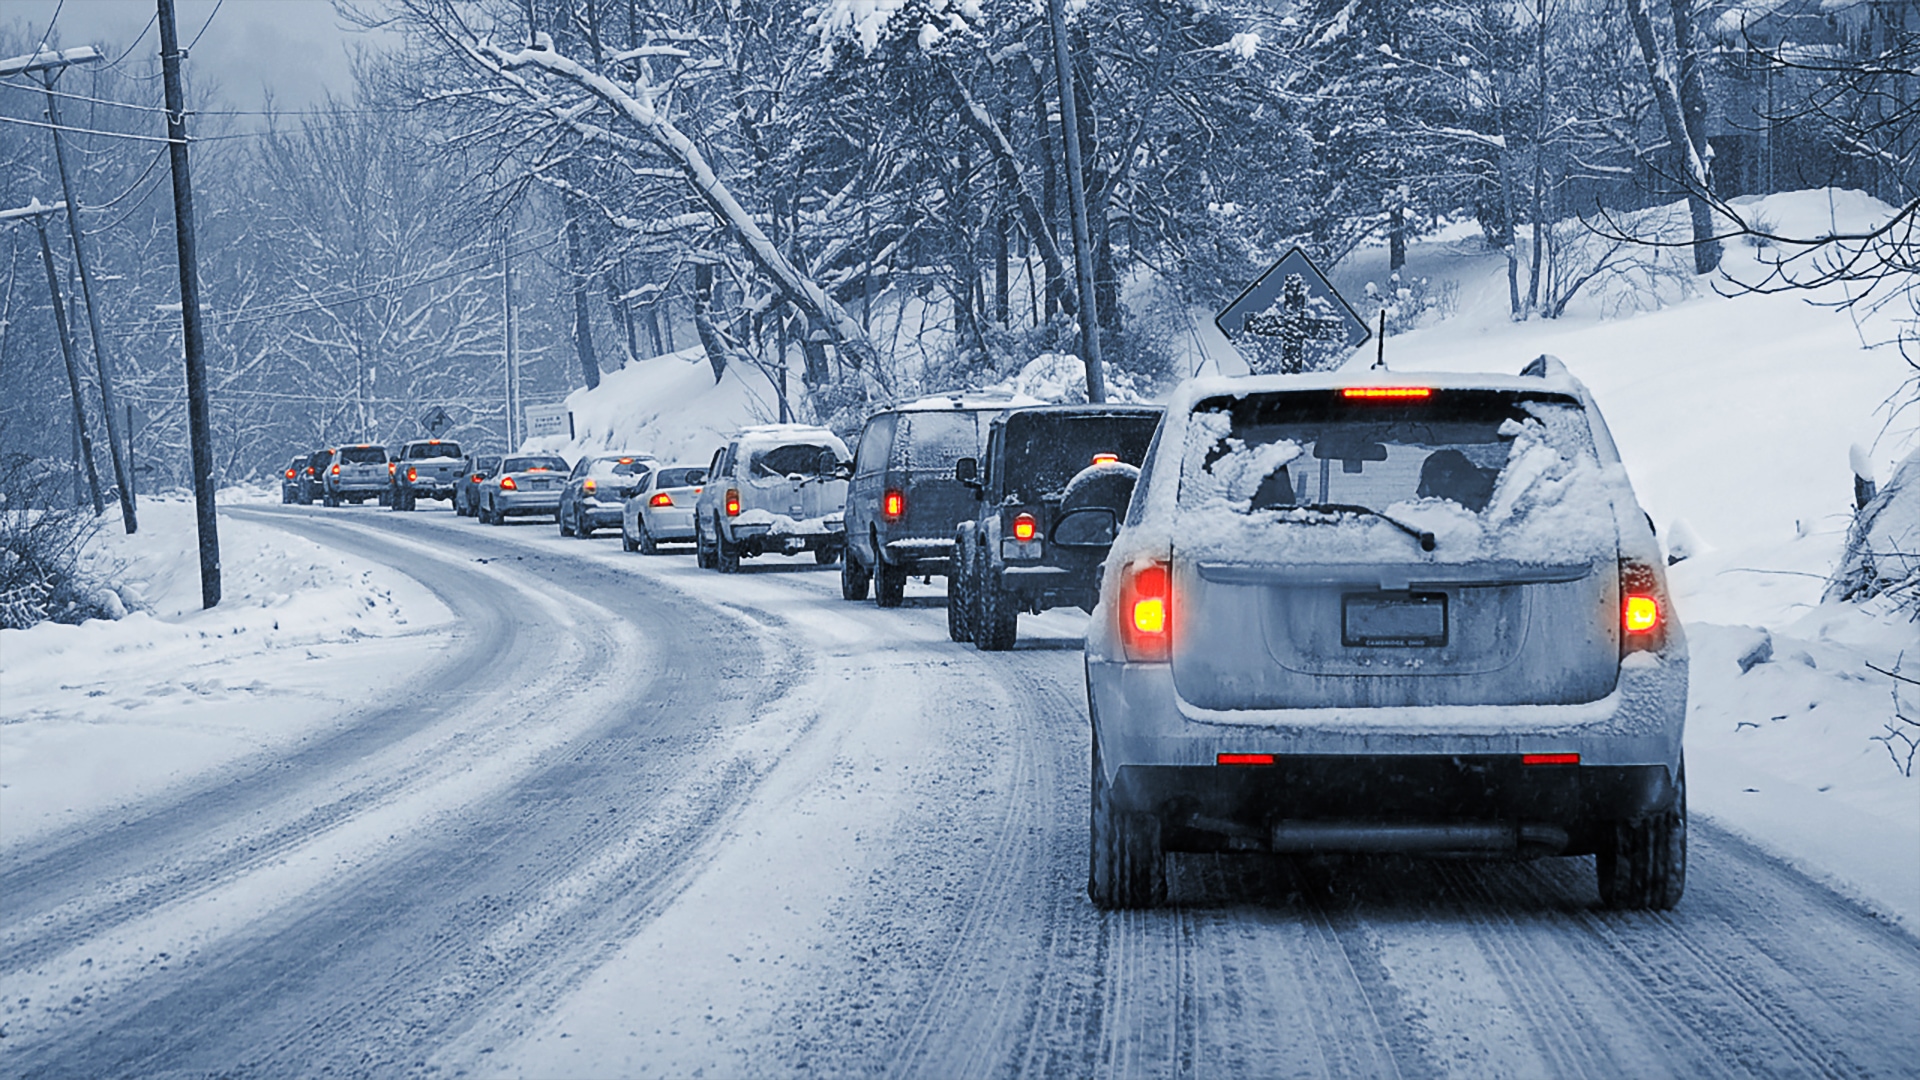 Picture of a car queue in winter, scenic snowy landscape